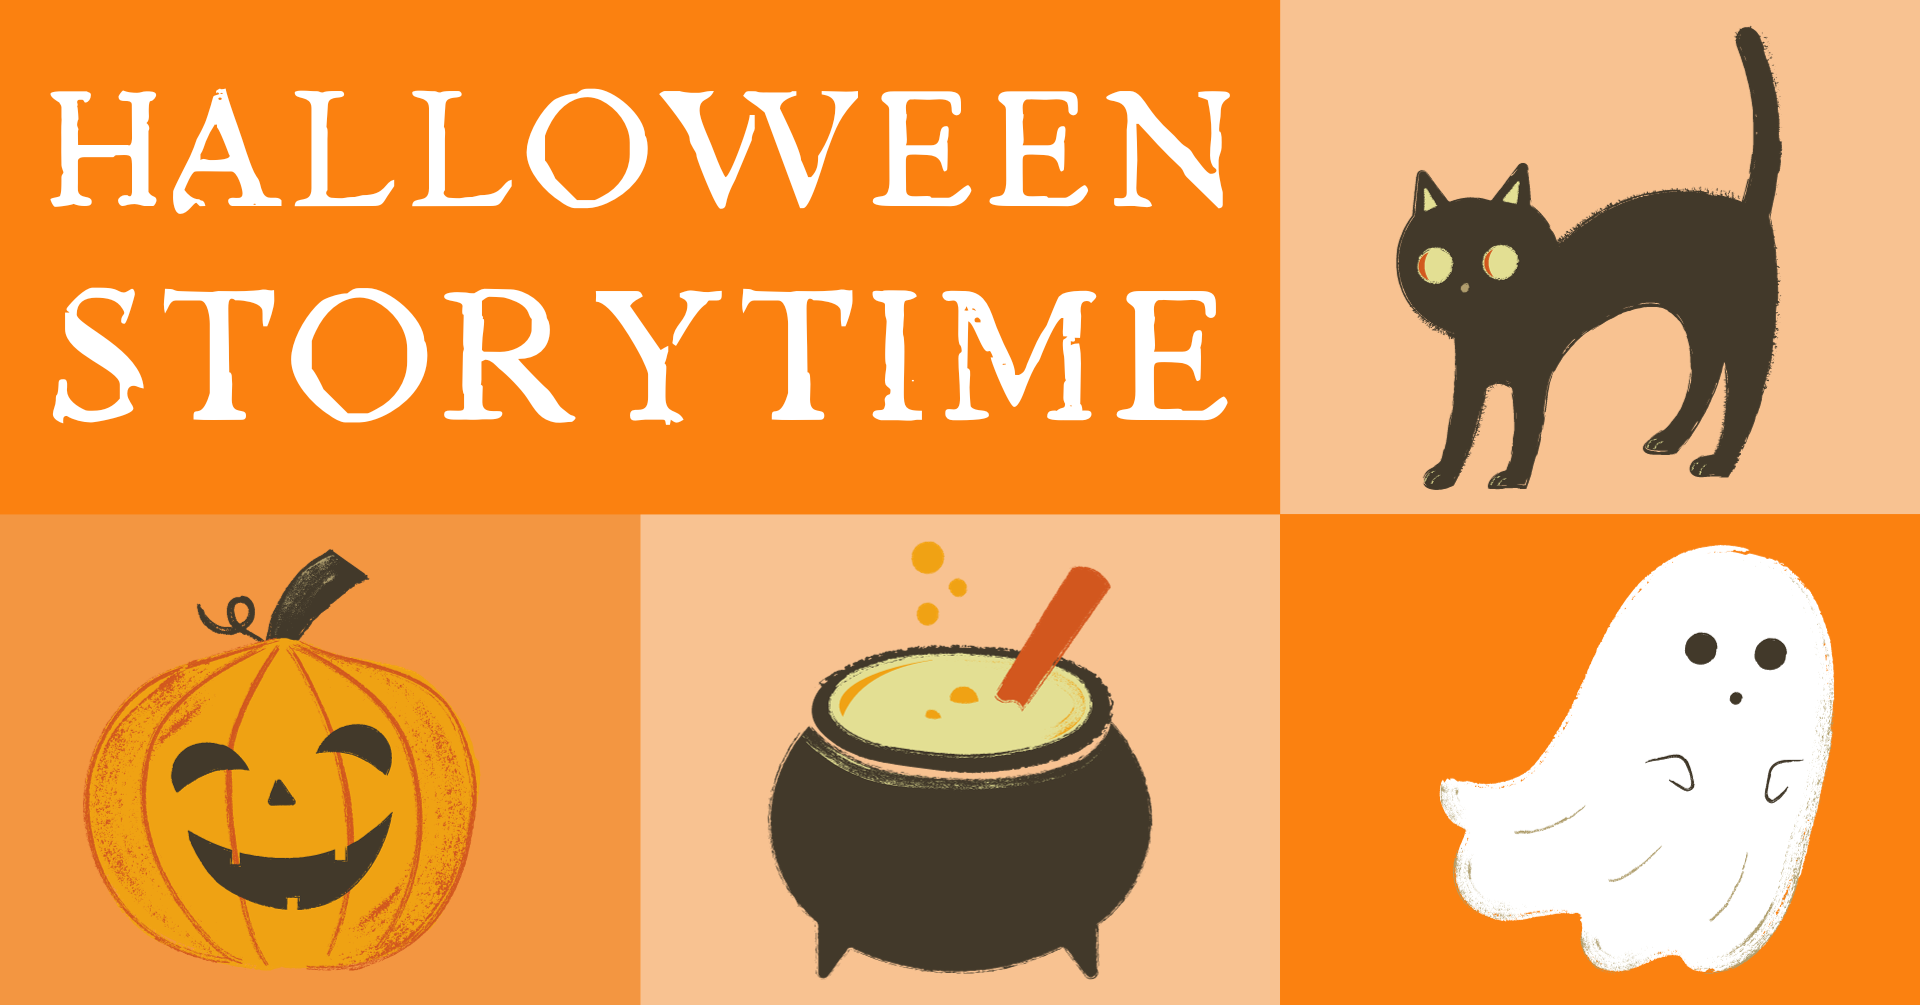 Orange block background with cat, pumpkin, cauldron and ghost graphics surrounding words Halloween Storytime